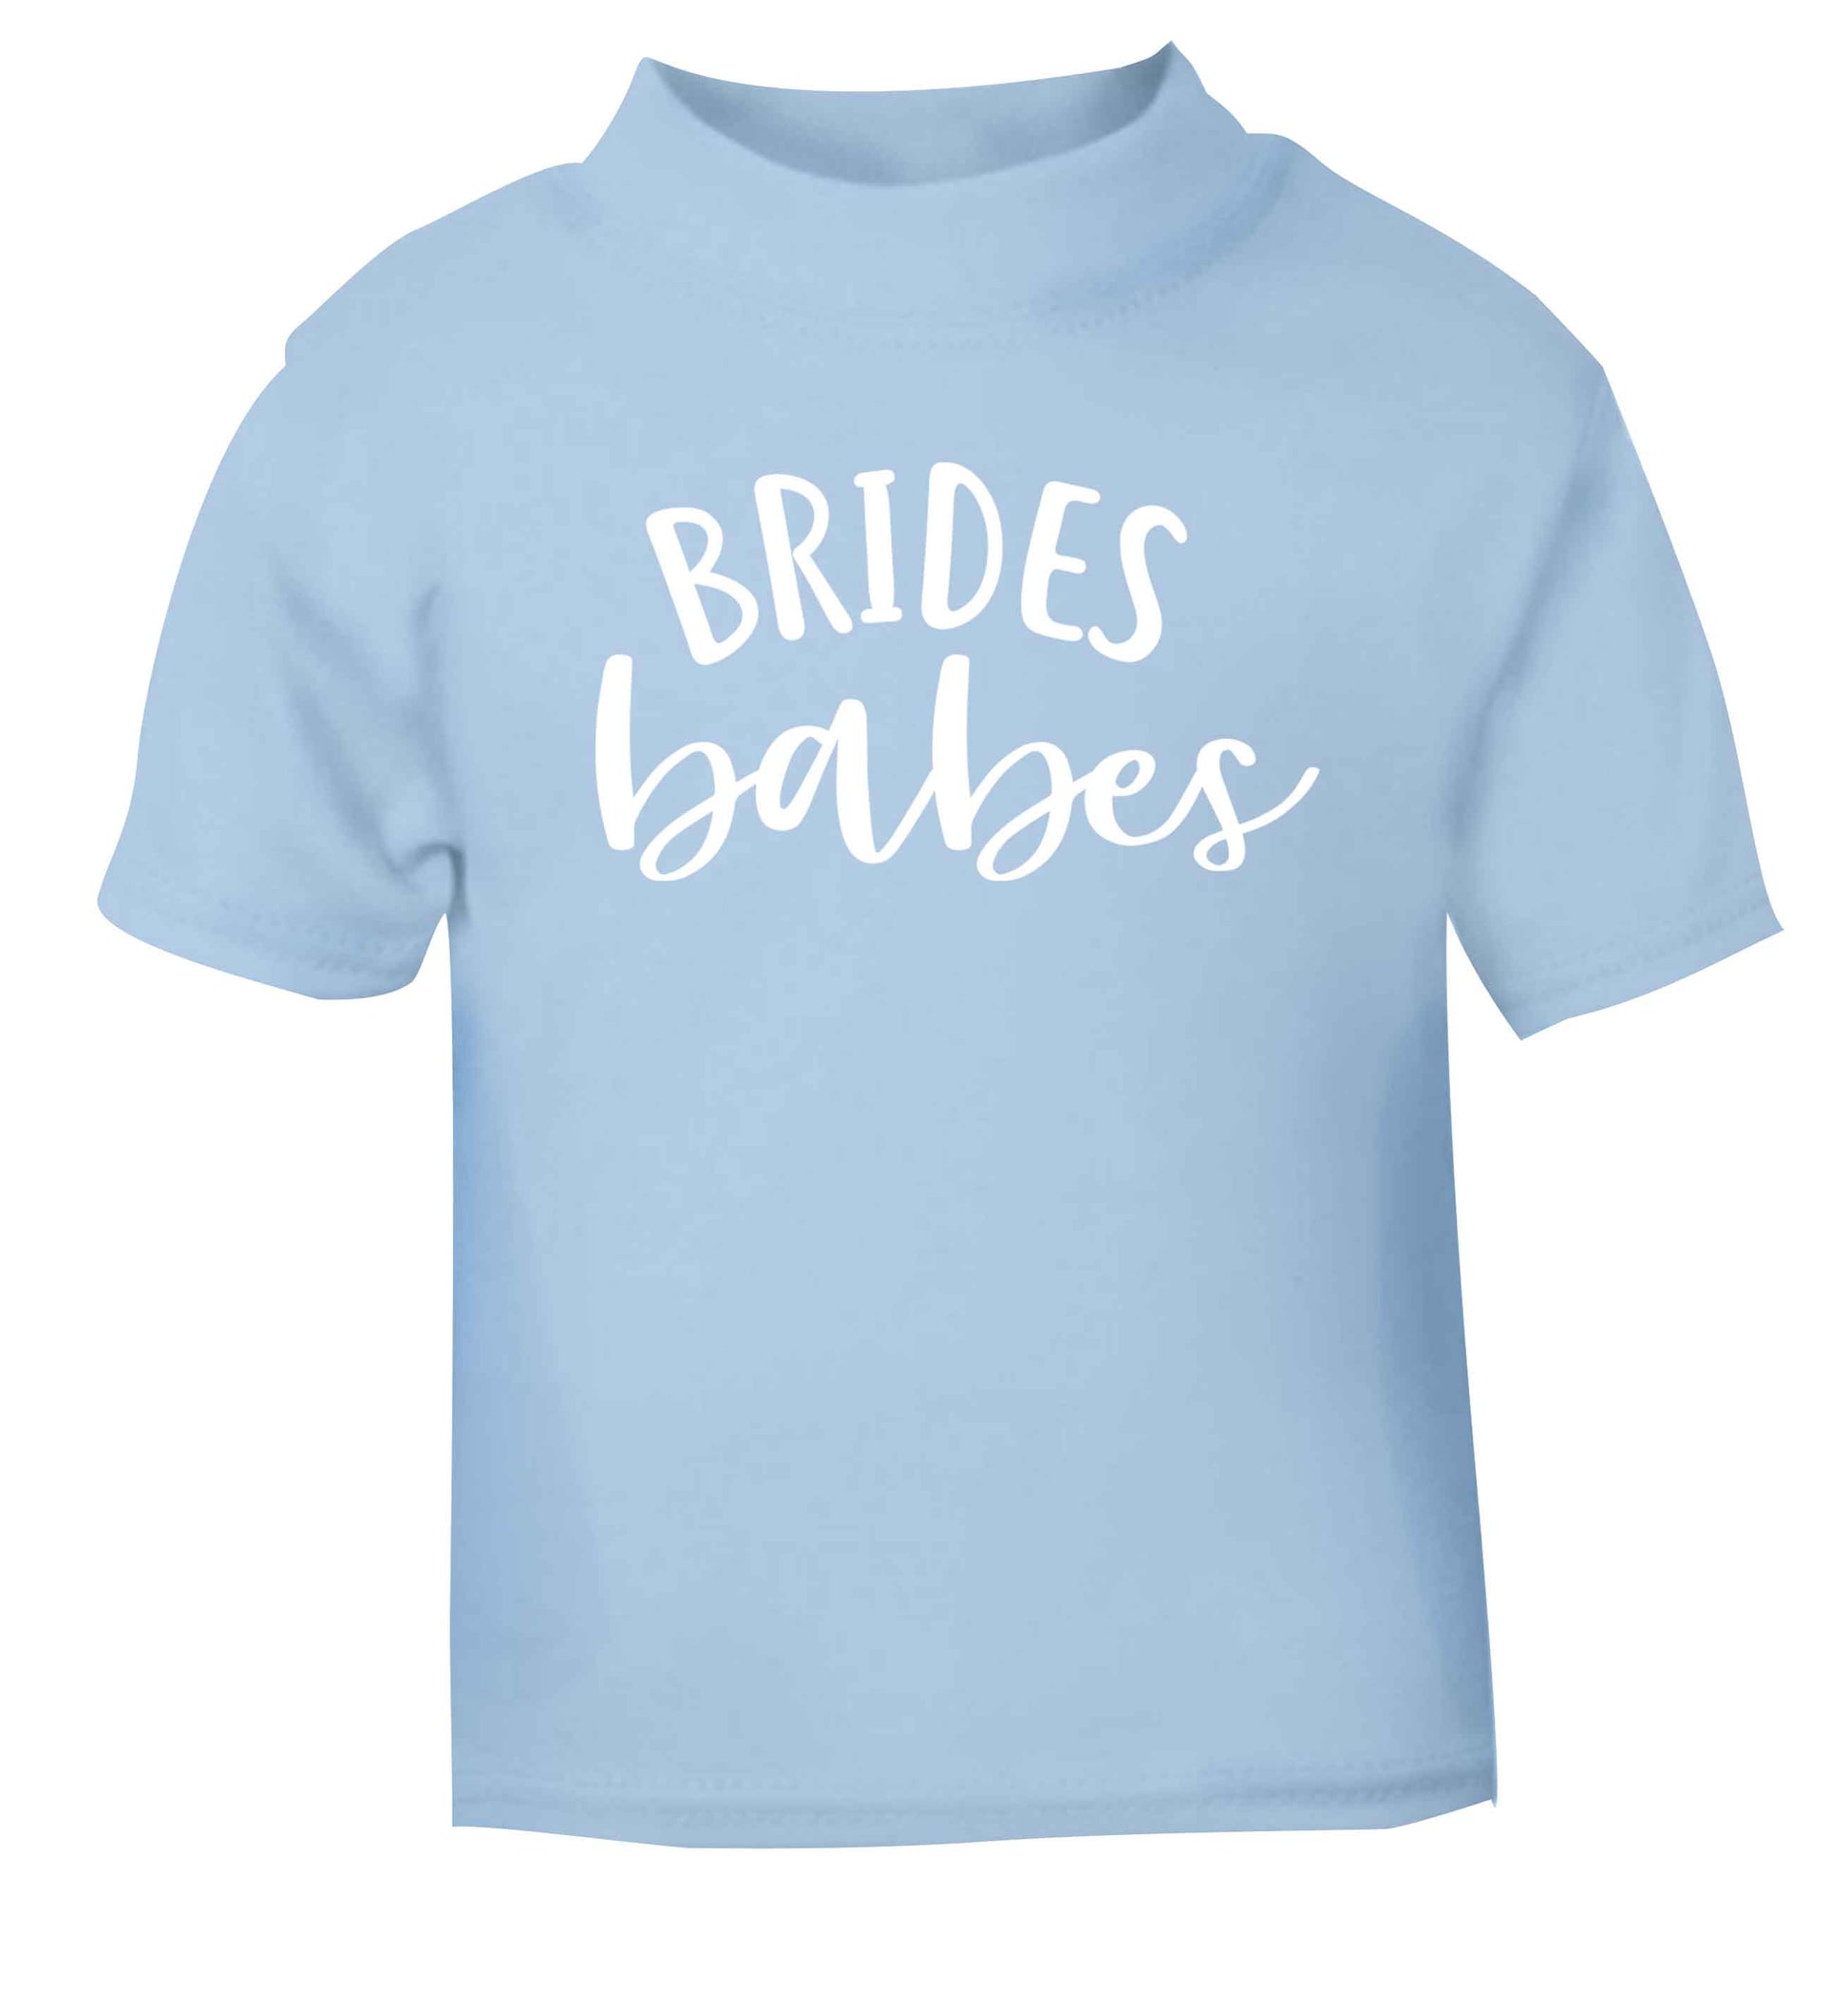 Brides Babes light blue Baby Toddler Tshirt 2 Years